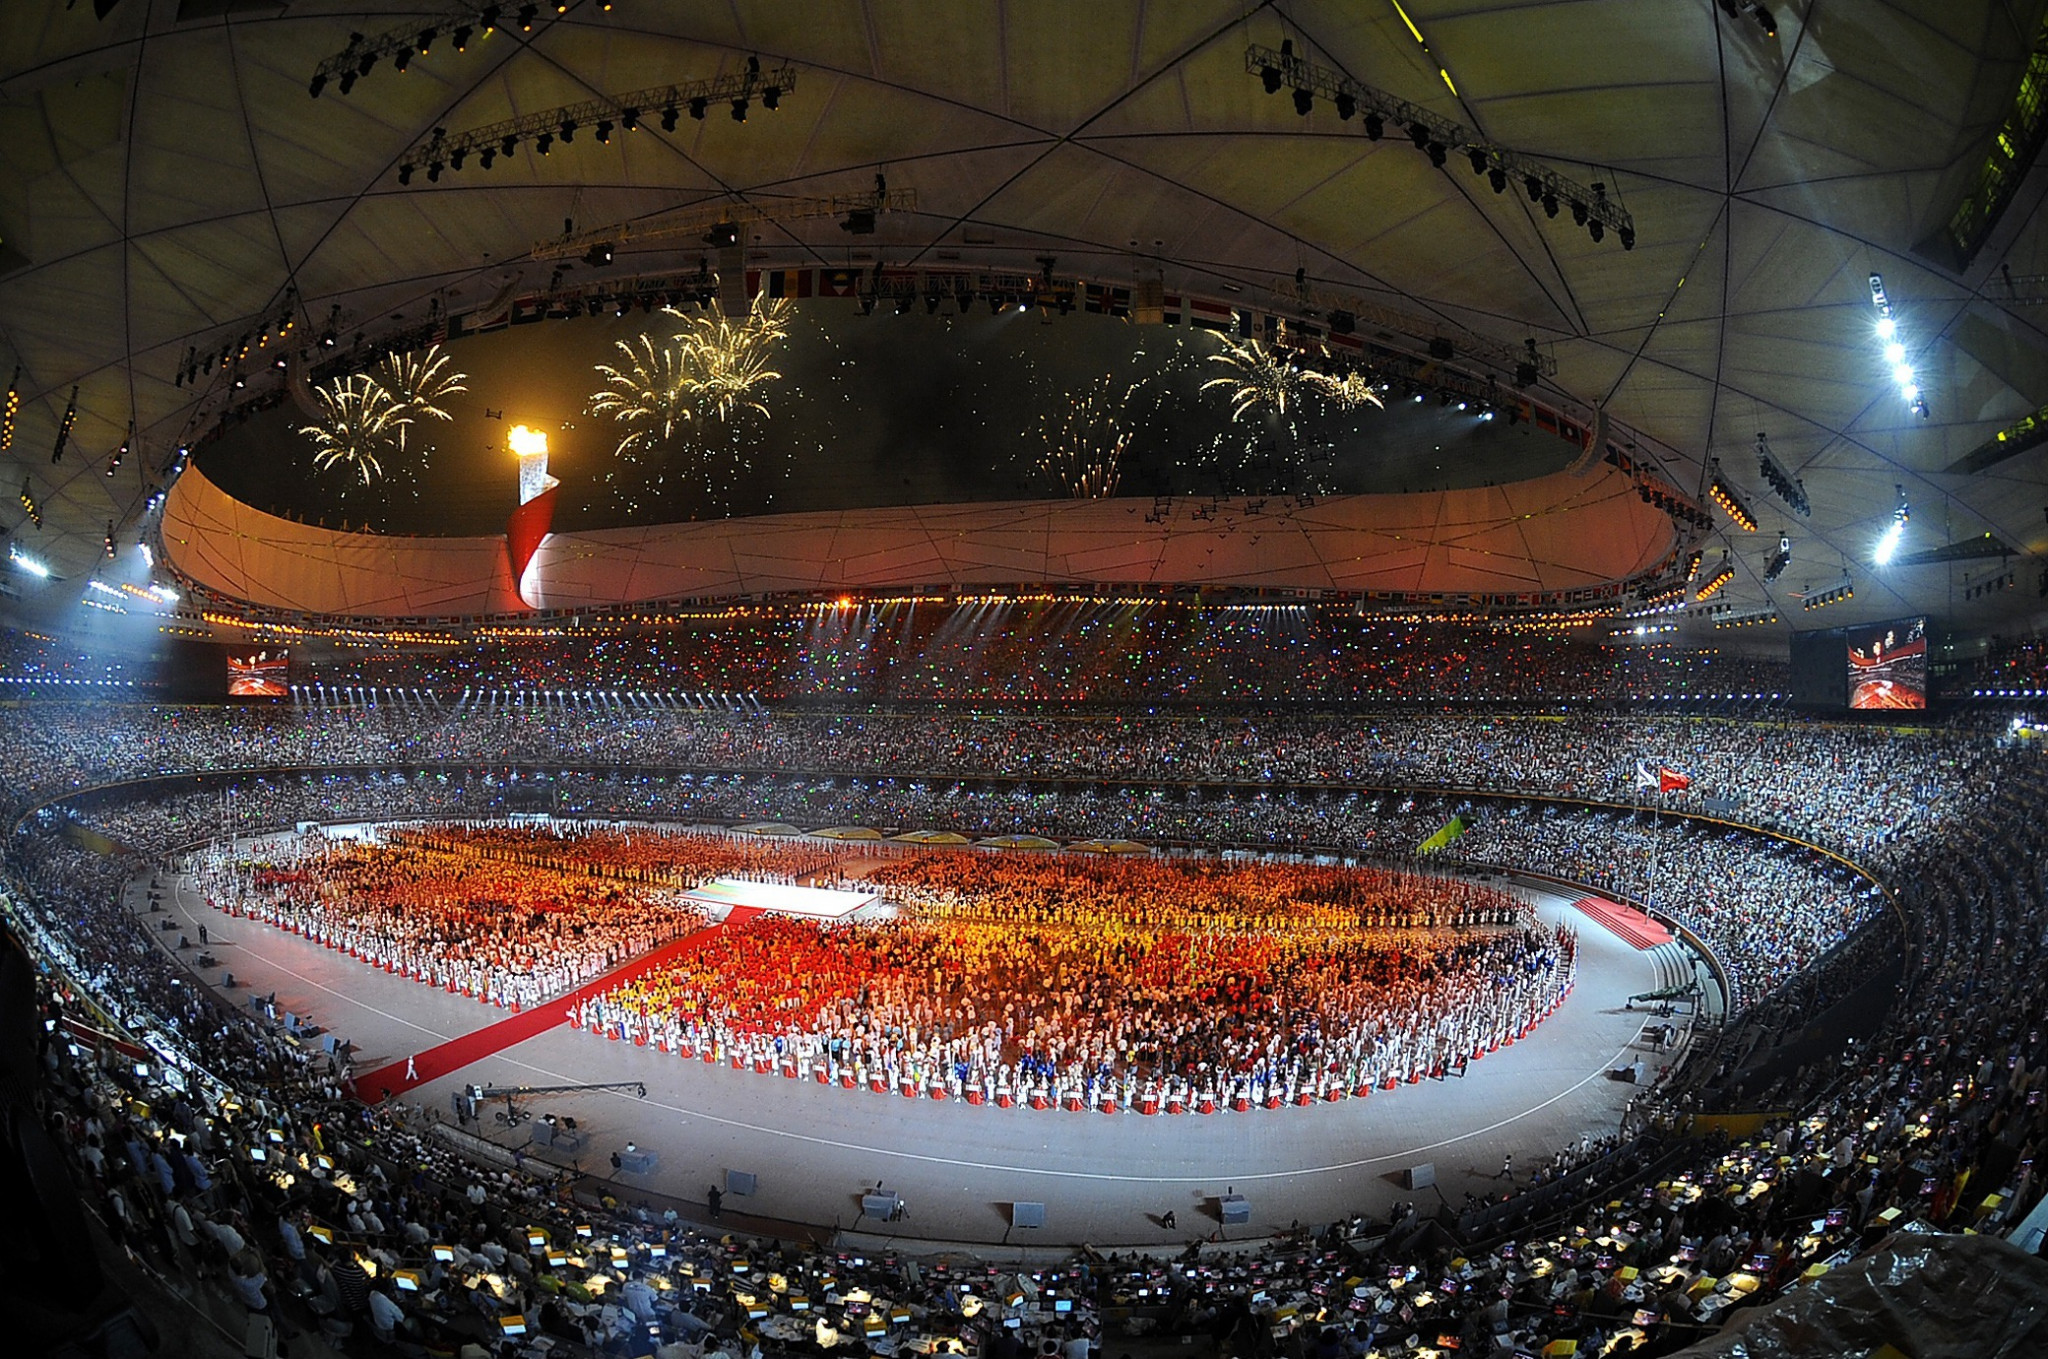 An exhibition has been opened at the Bird's Nest Stadium to mark 15 years since China hosted the Beijing 2008 Summer Olympics ©Getty Images